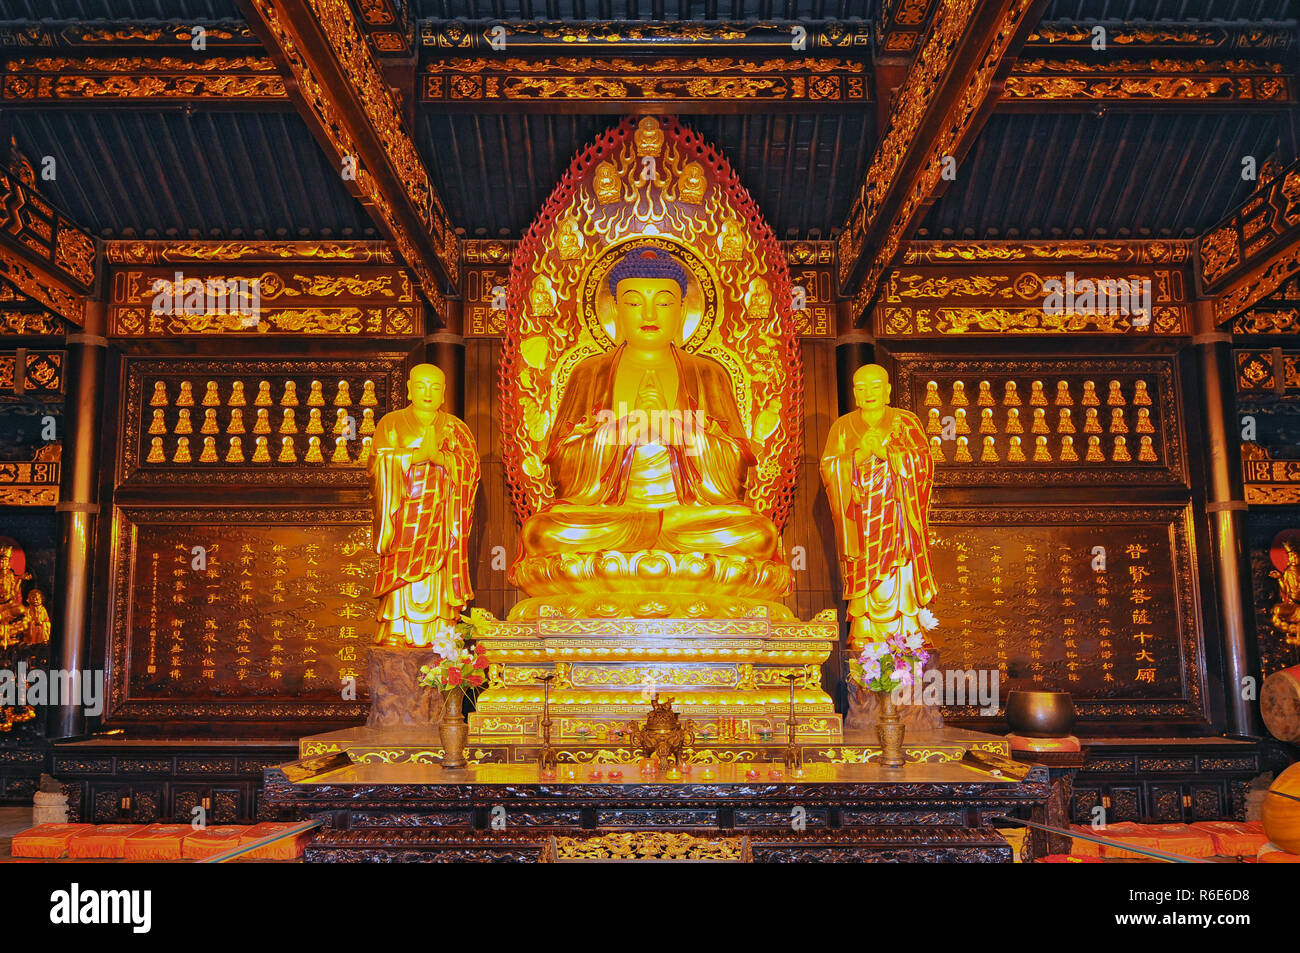 The Golden Statue Of The Buddha And Two Monks Of The Da Ci'En Temple, Xian, China Stock Photo